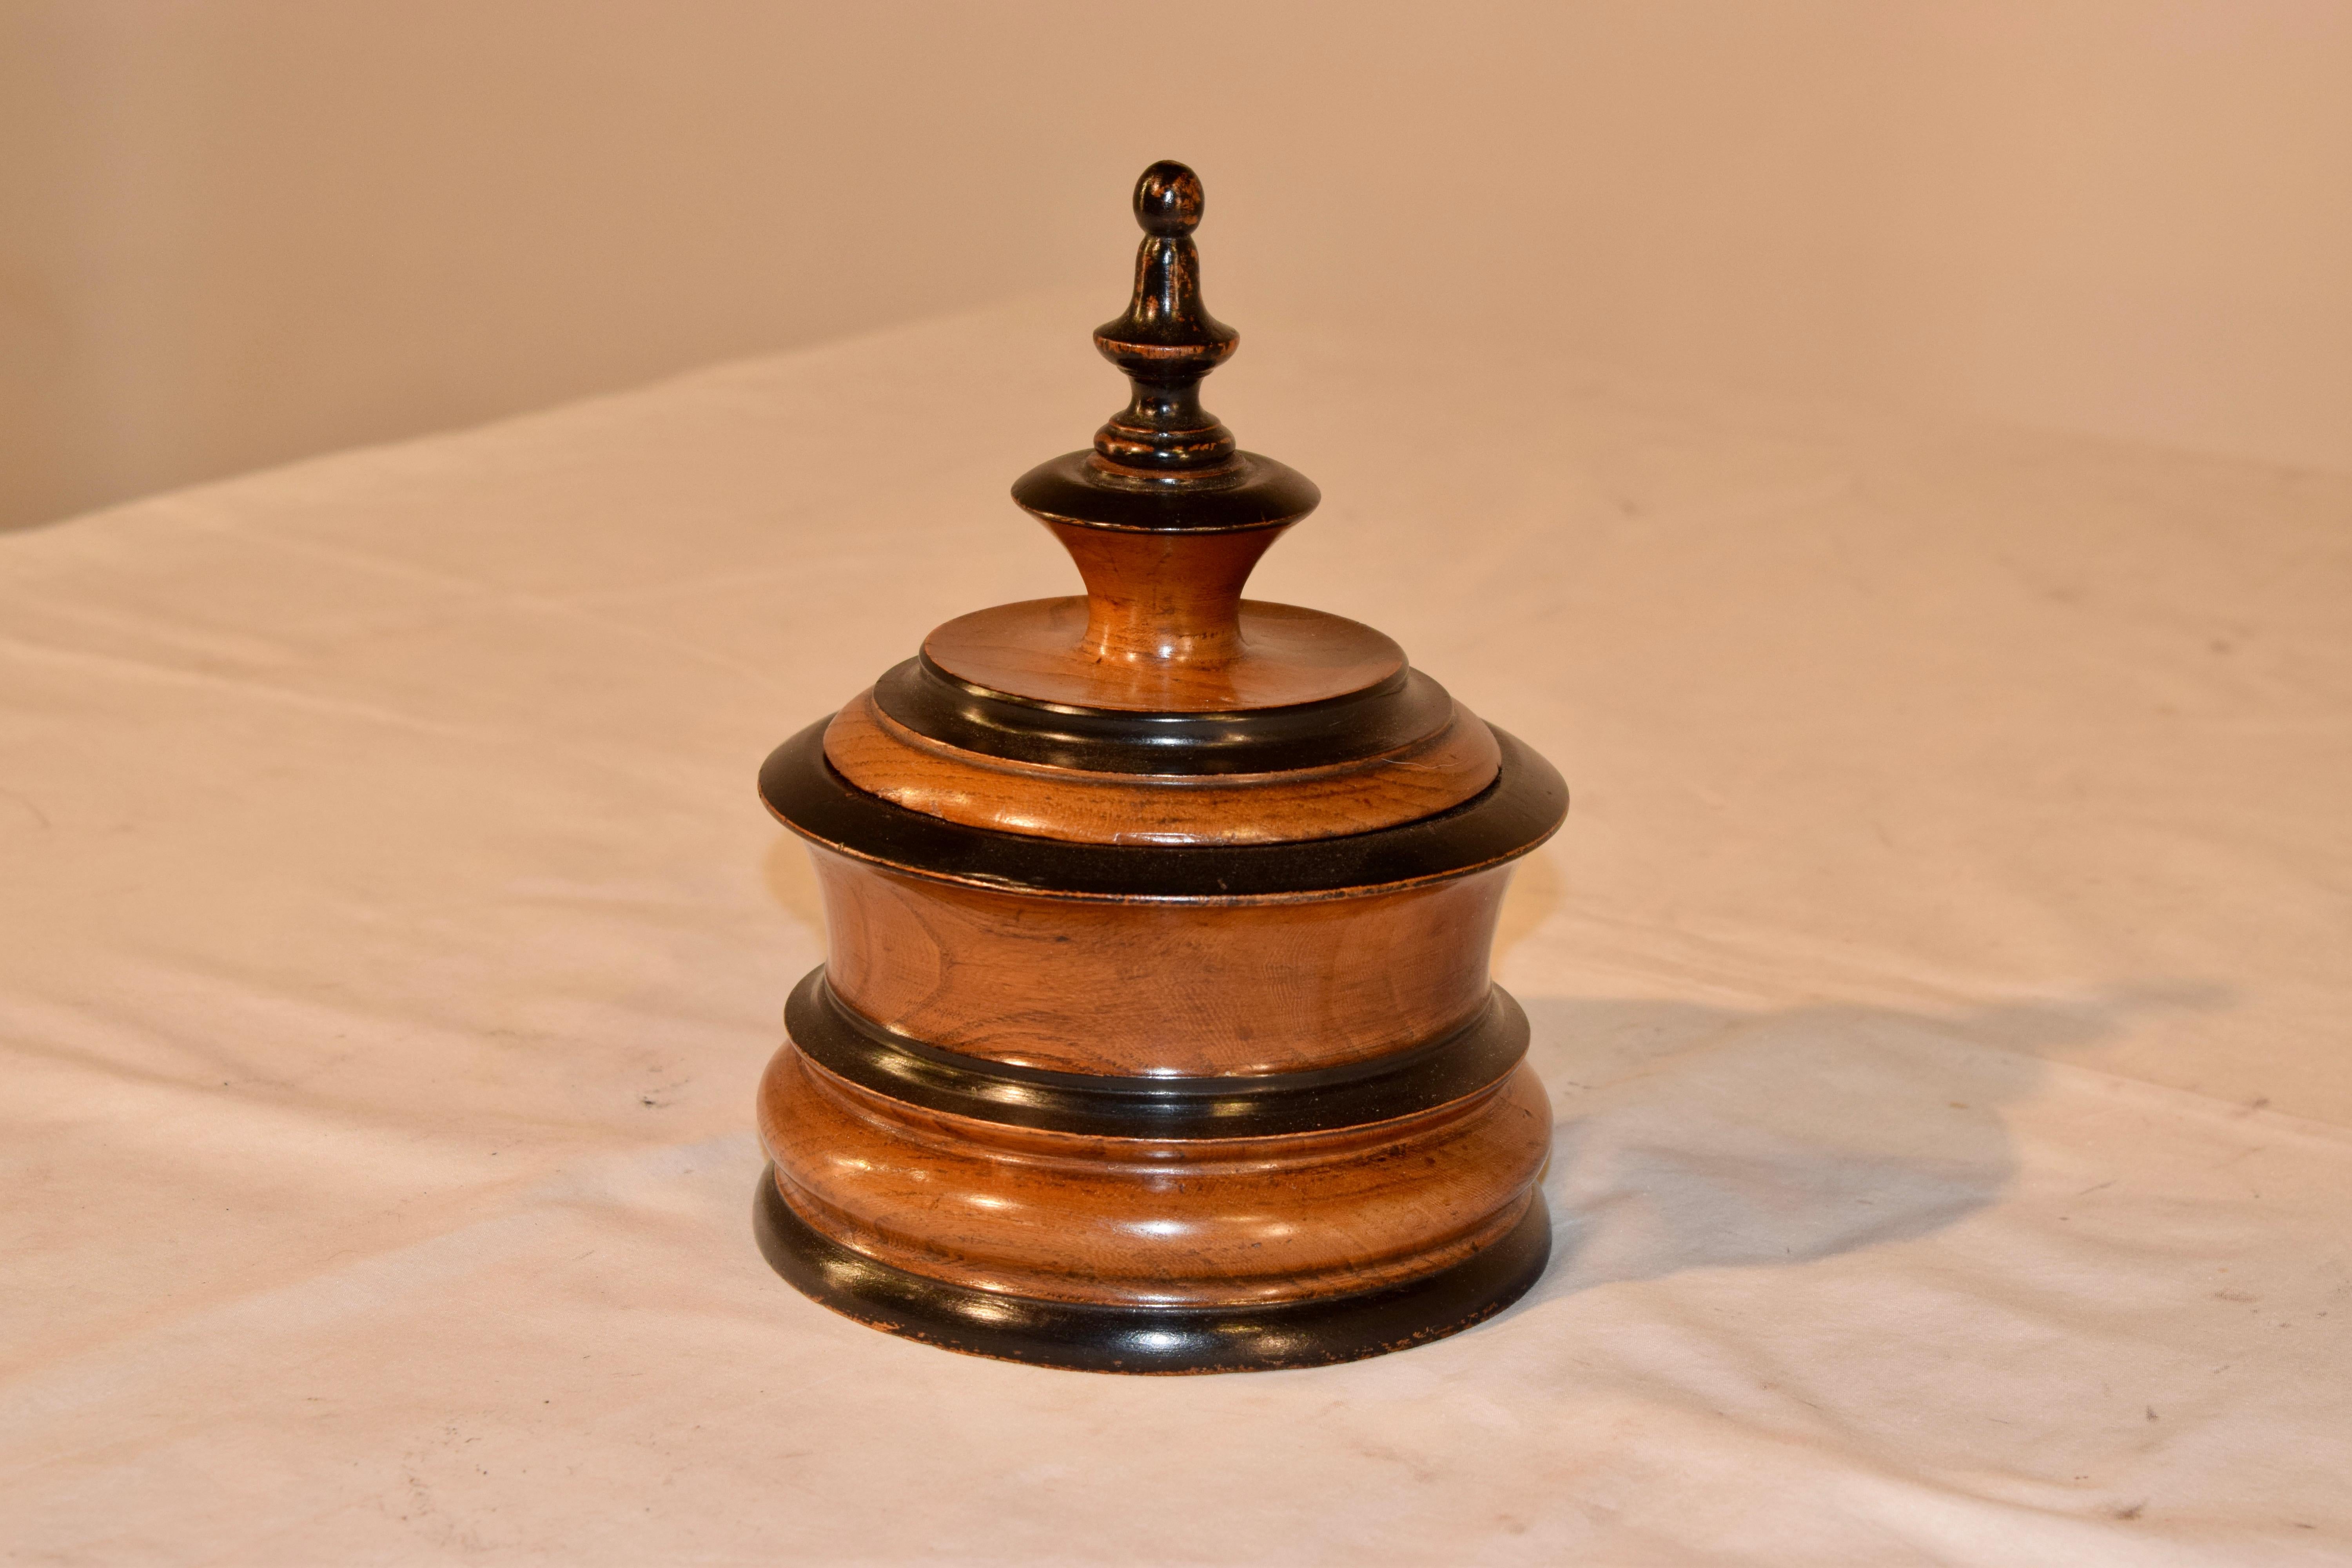 19th century hand turned treen humidor from the Netherlands. The jar is made from fruitwood and has been wonderfully hand turned and thoughtfully ebonized to accent the turned pattern. The lid is finished with a tall finial.